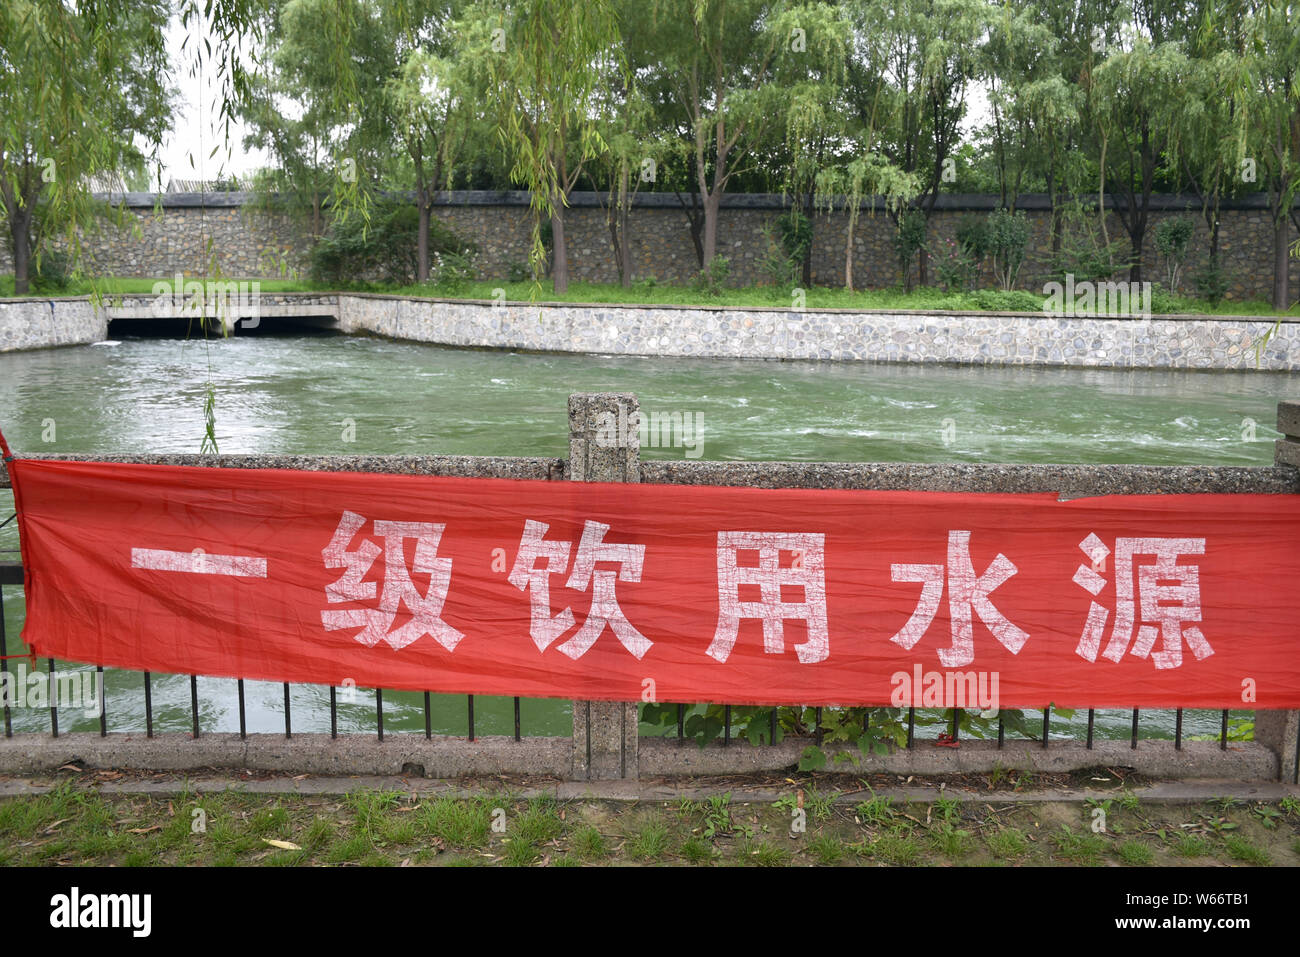 View of the warning reading 'First Level Drinking Water Source; No Swimming' near the pond of the Summer Palace in Beijing, China, 15 July 2018.   Unr Stock Photo